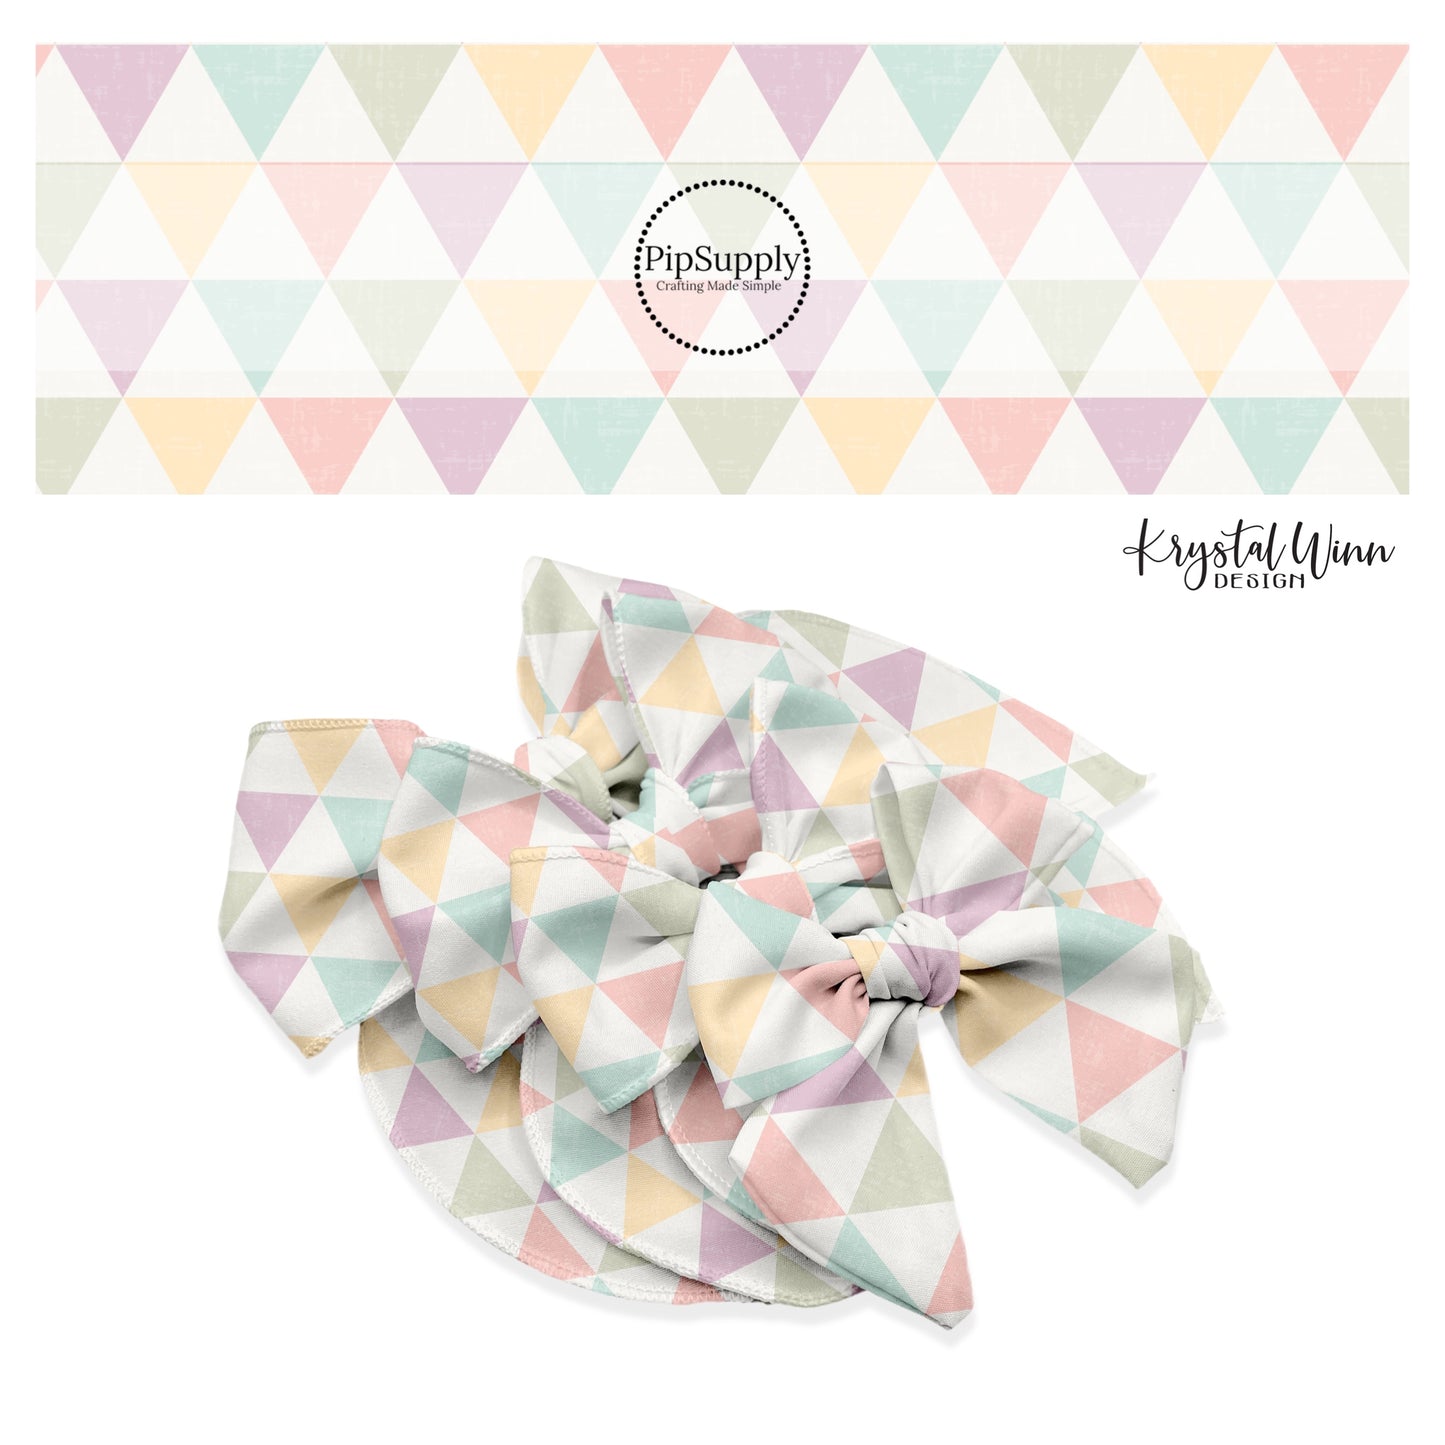 Pink coral, light blue, sage, lavender, butter yellow triangles on a distressed bow strip